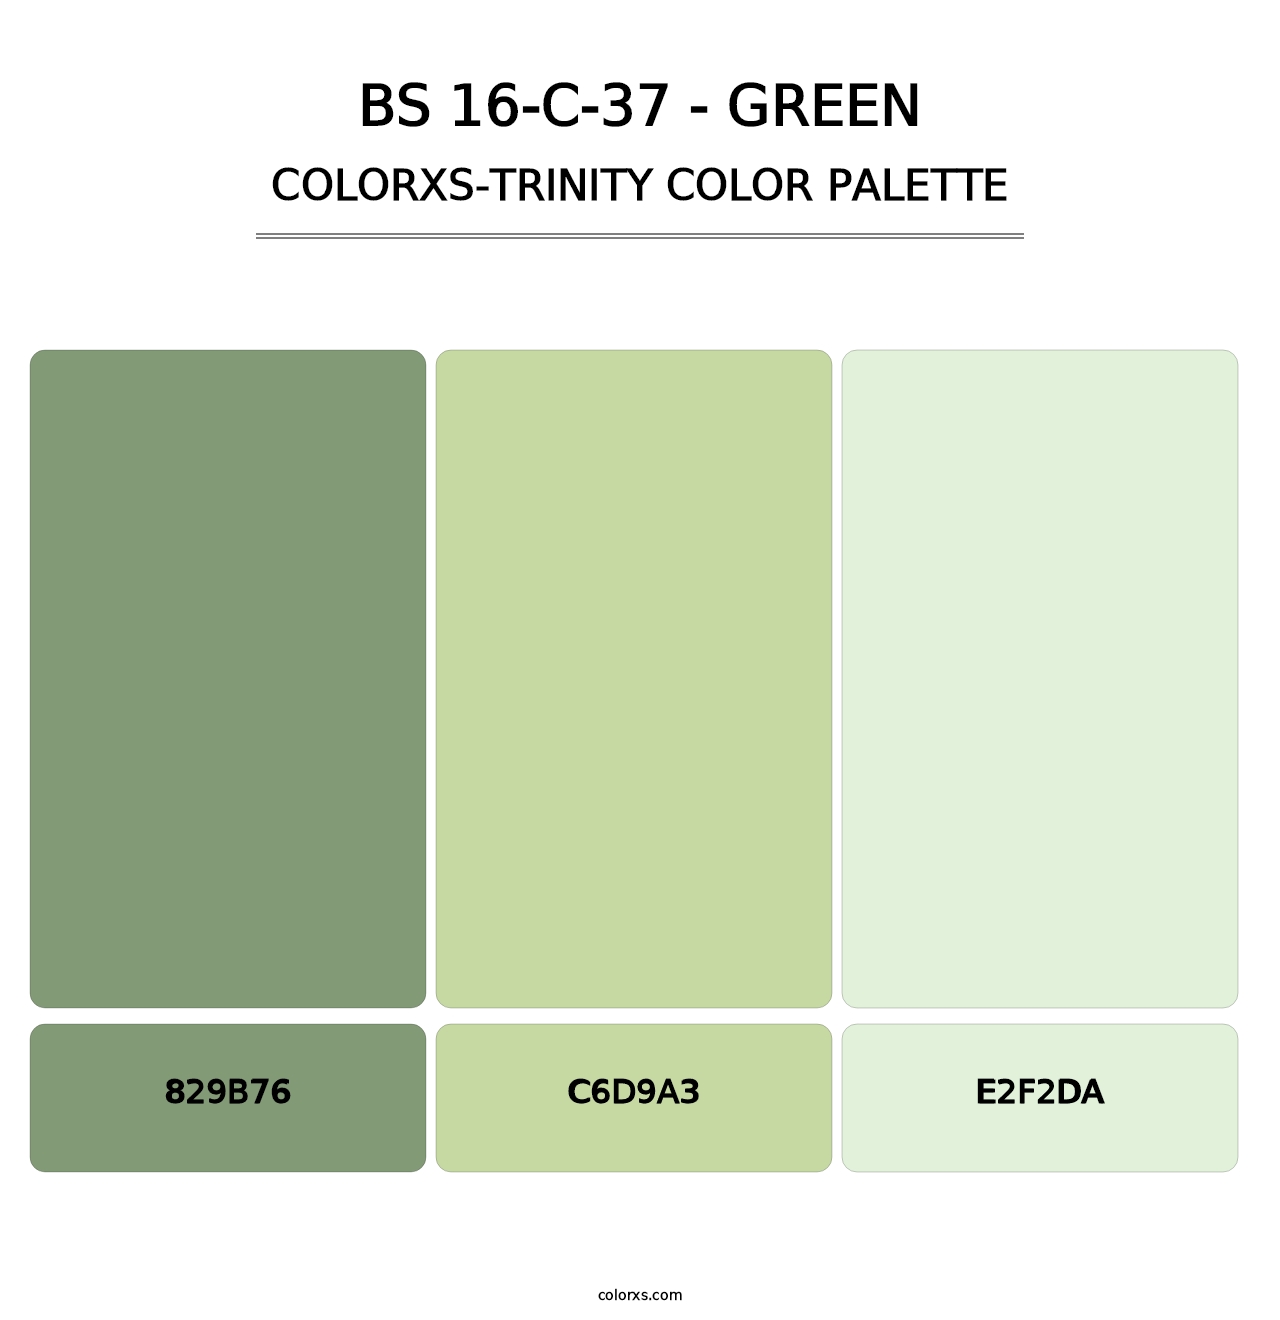 BS 16-C-37 - Green - Colorxs Trinity Palette